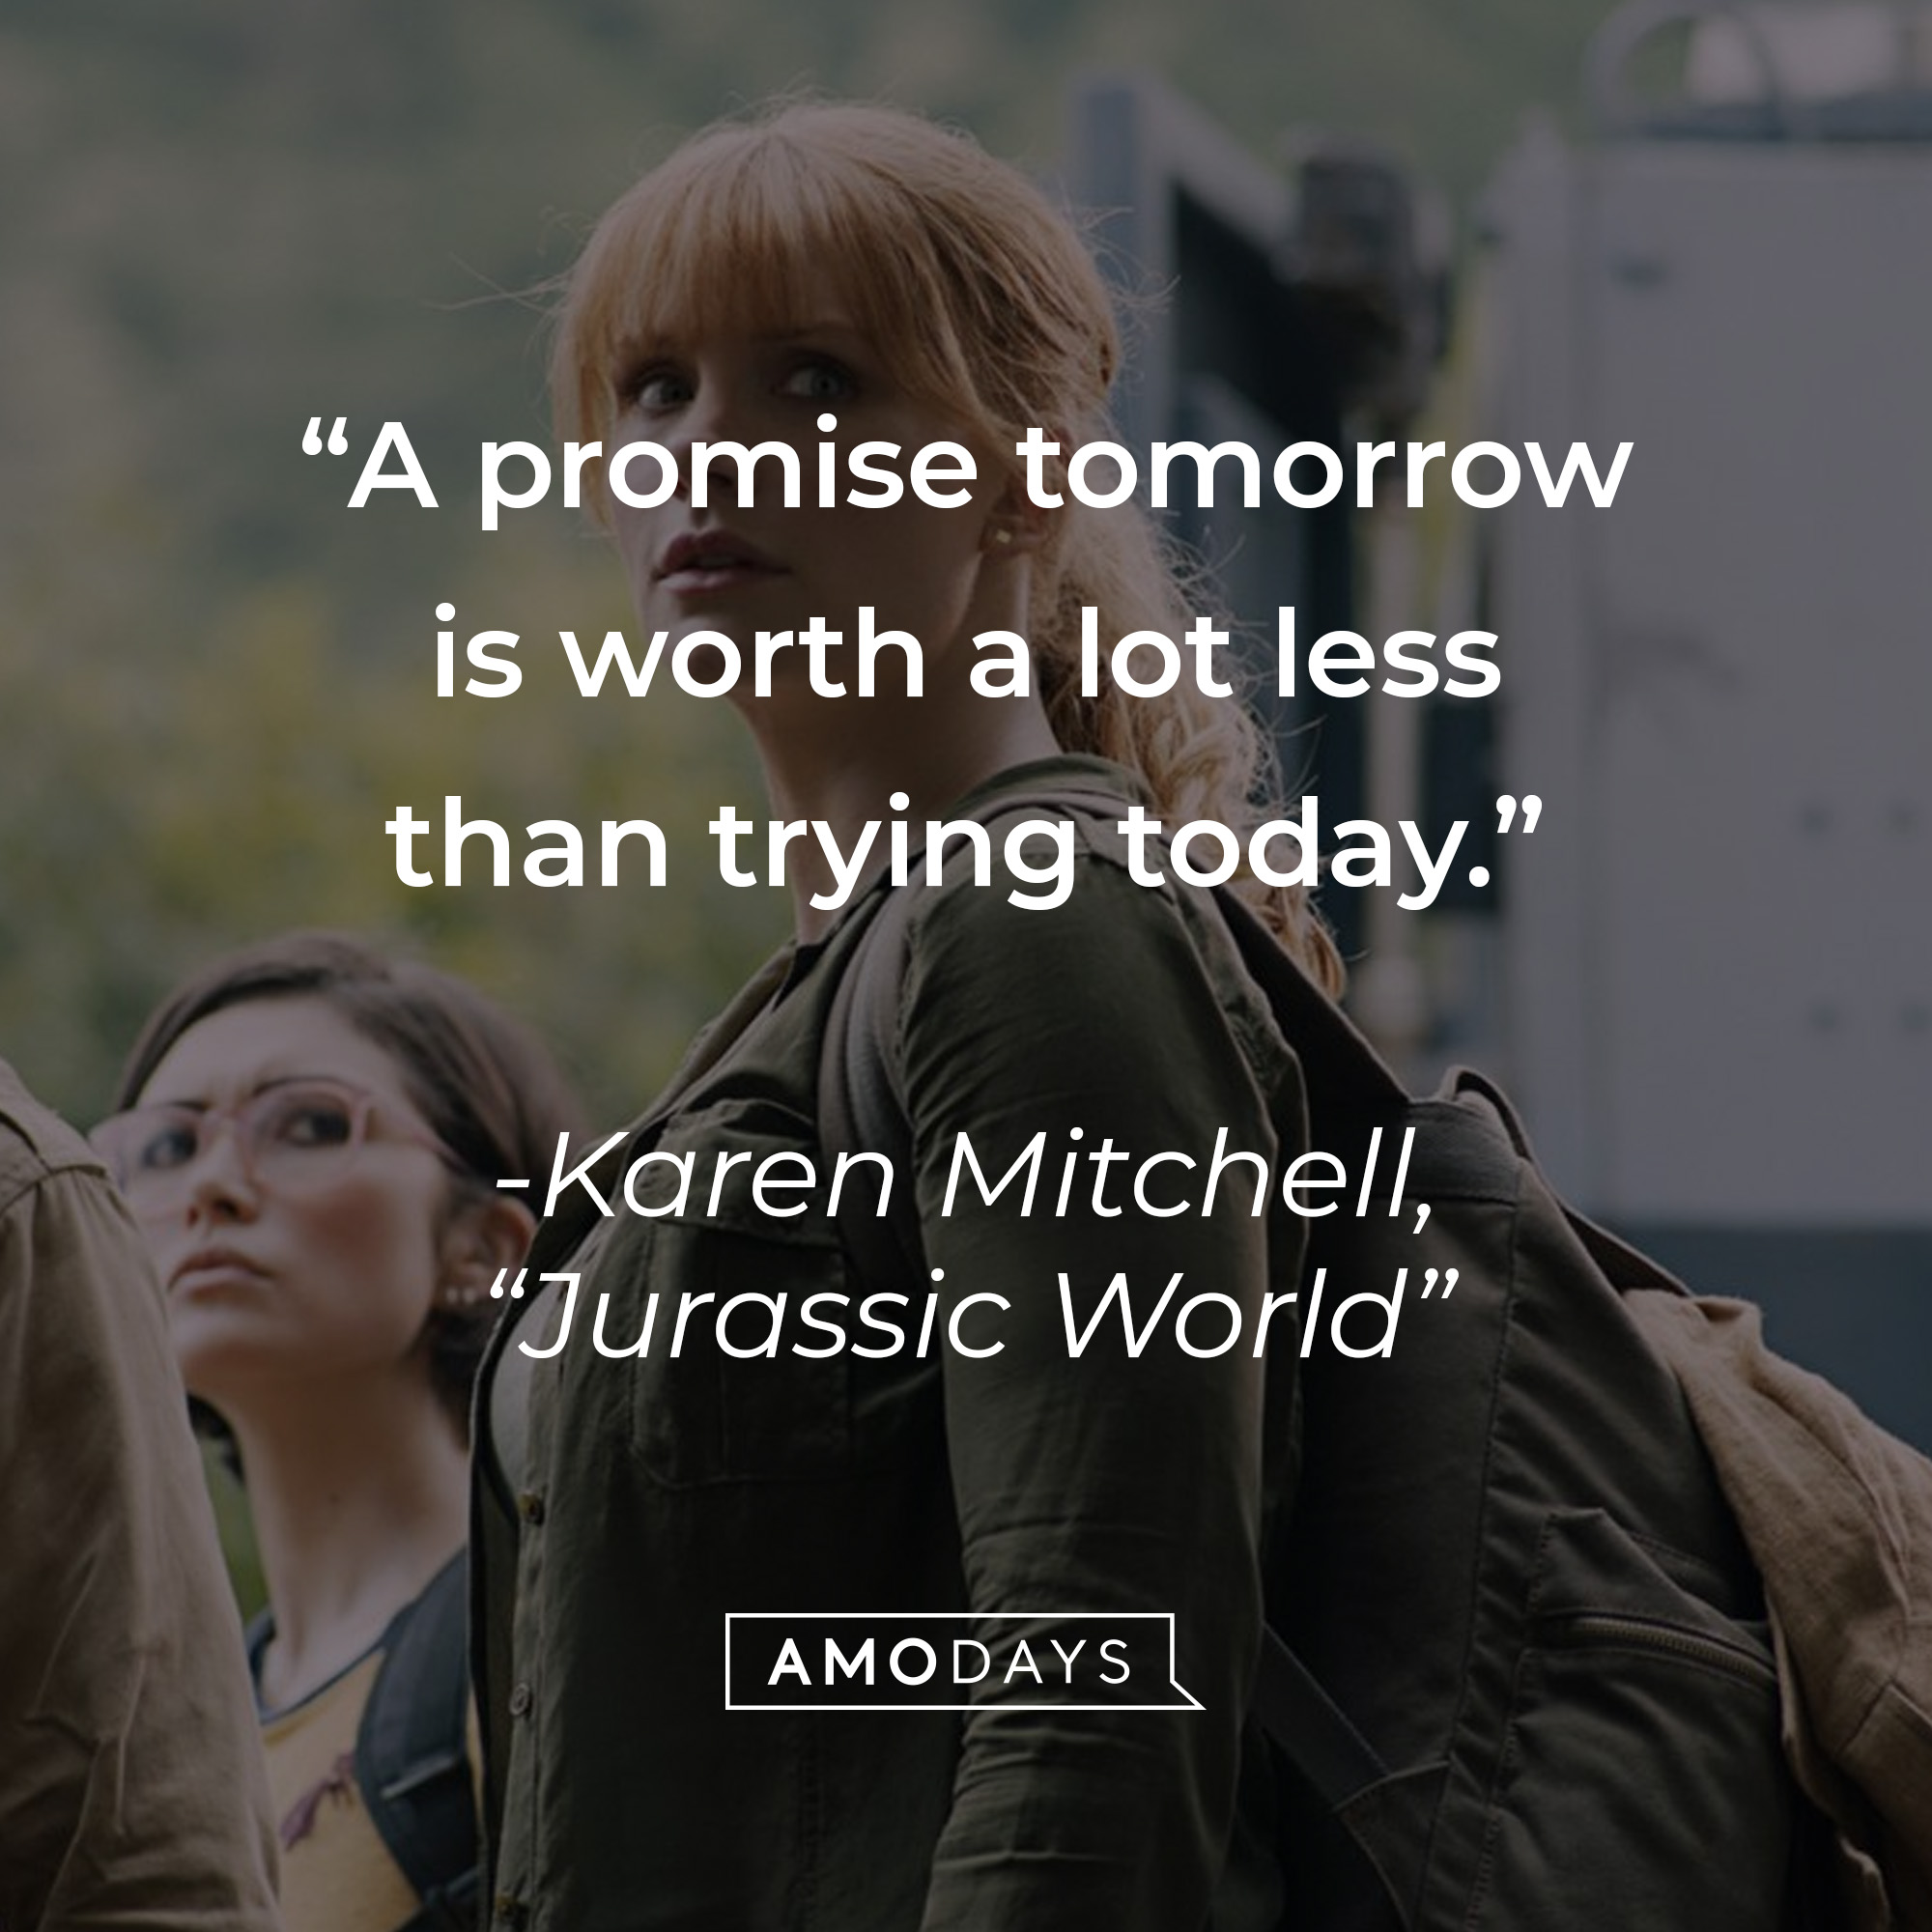 Karen Mitchell's quote: "A promise tomorrow is worth a lot less than trying today." | Source: facebook.com/JurassicWorld